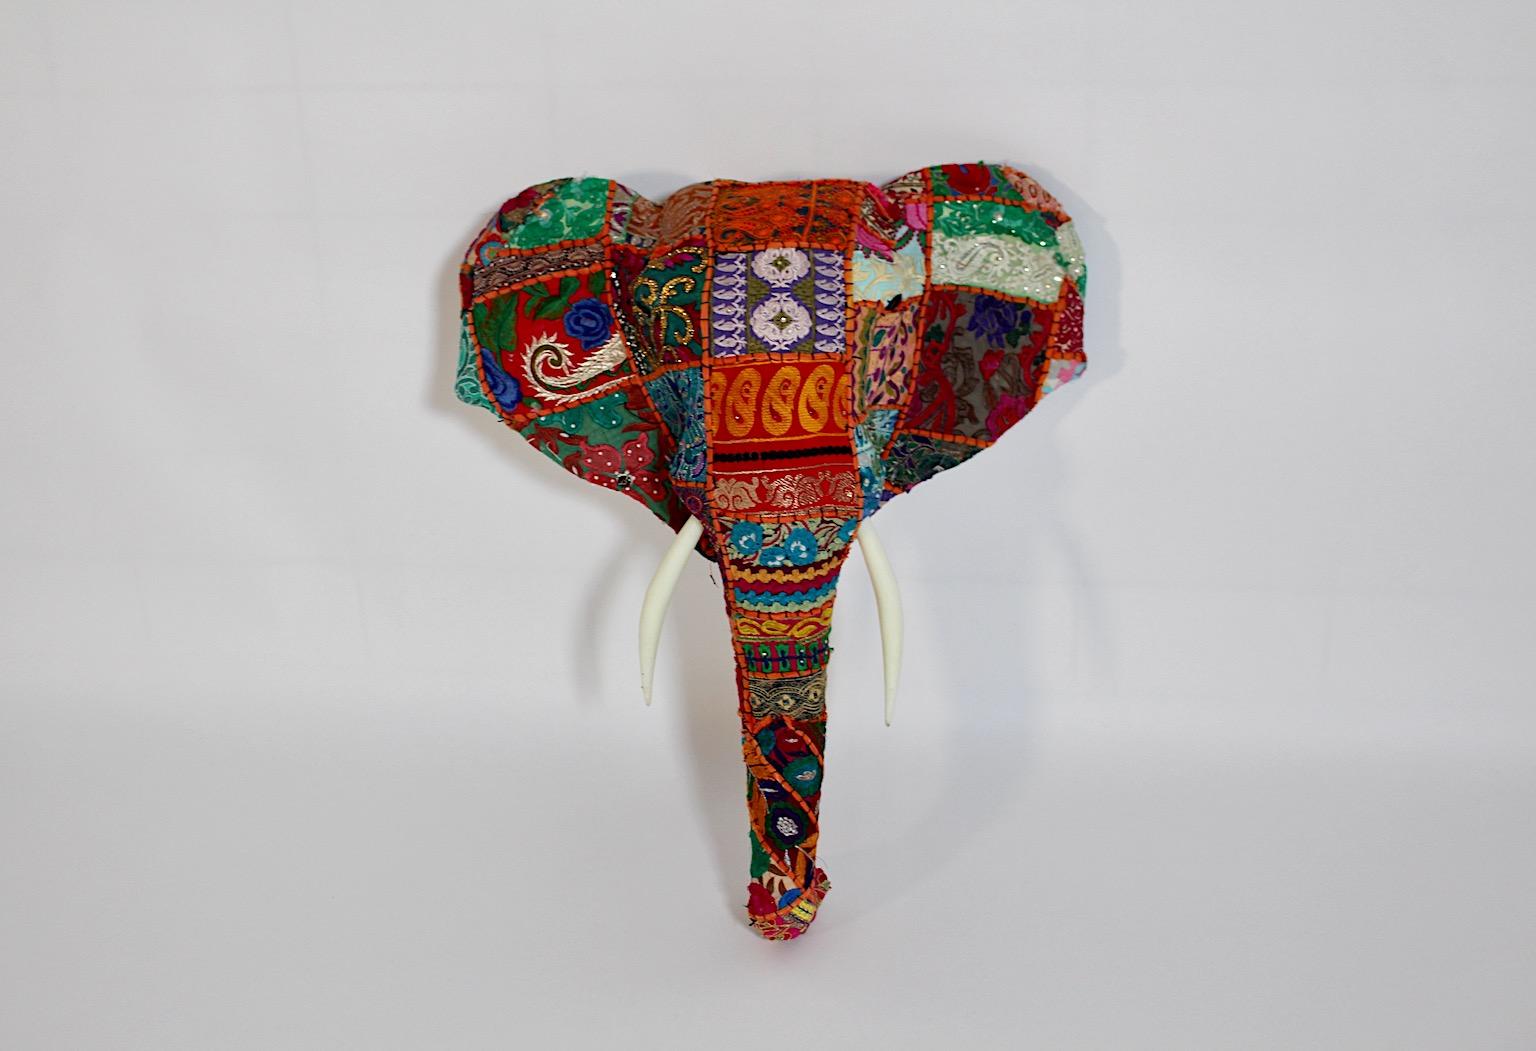 Embroidered Animal Folk Art Vintage Patchwork Fabric Embroidery Elephant Head c 1980s India For Sale